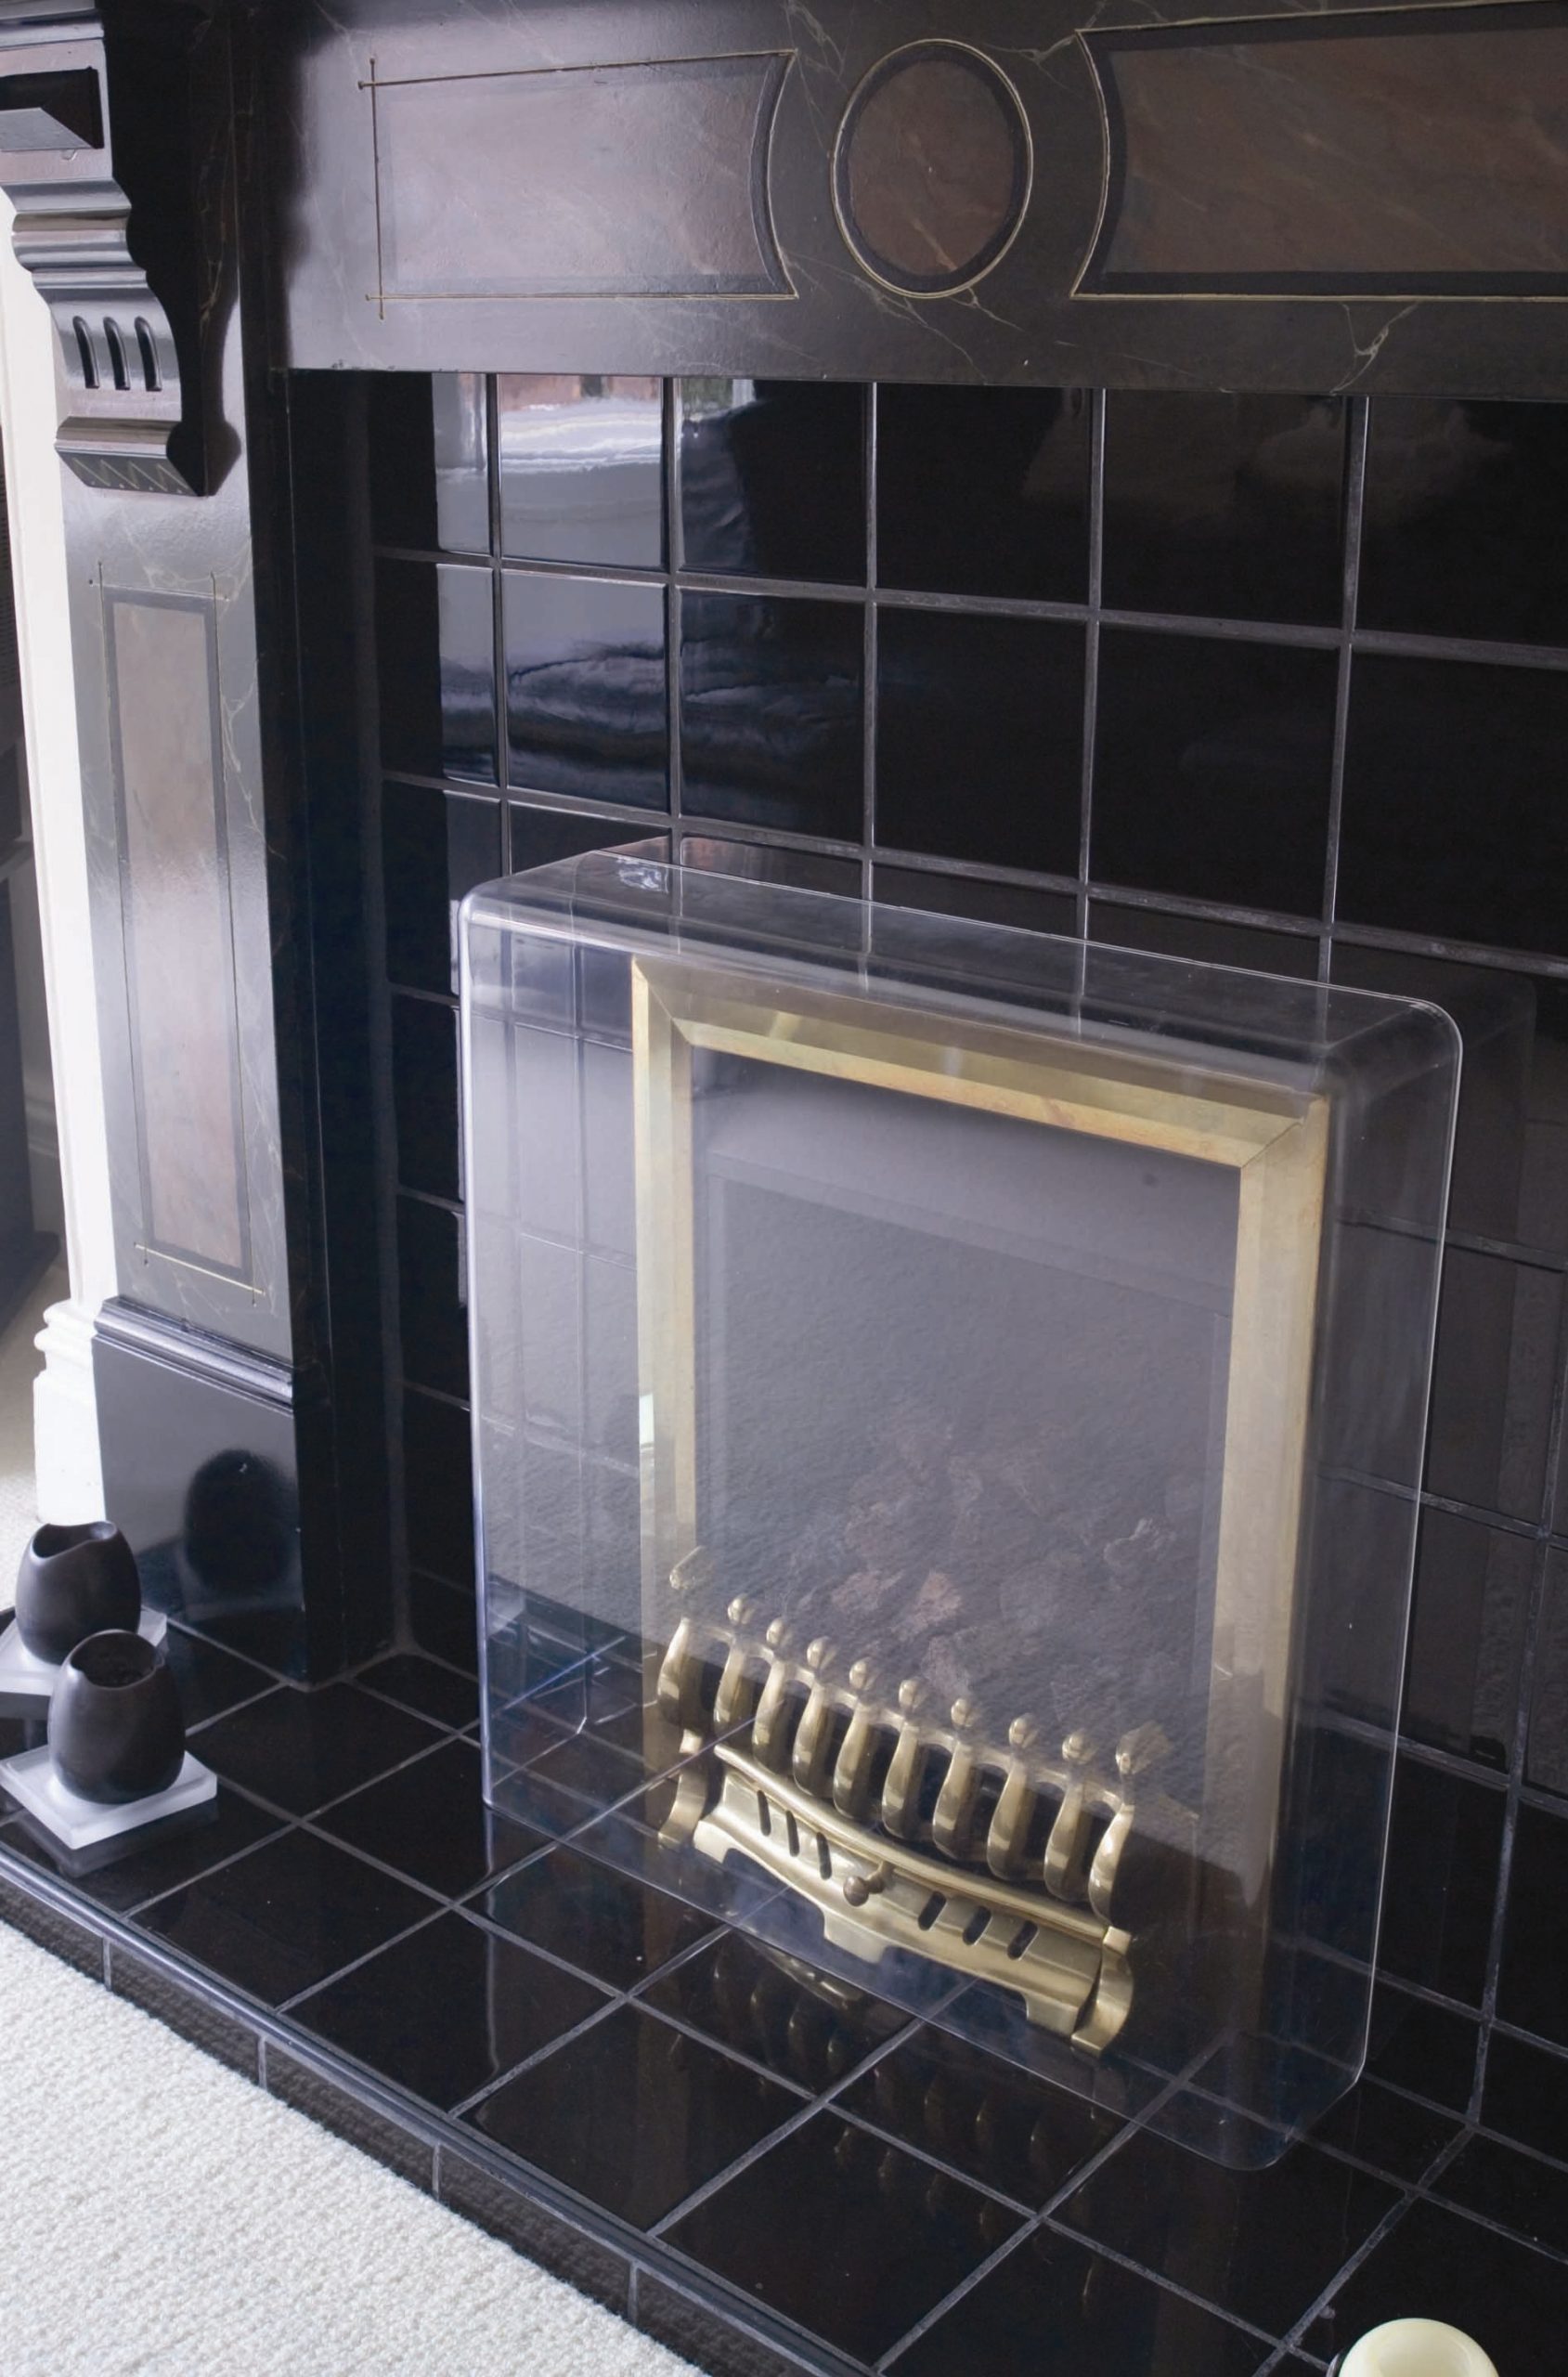 Fireplace and Chimney Authority New Fireplace Heatsaver – Helping British Households Tackle Fuel